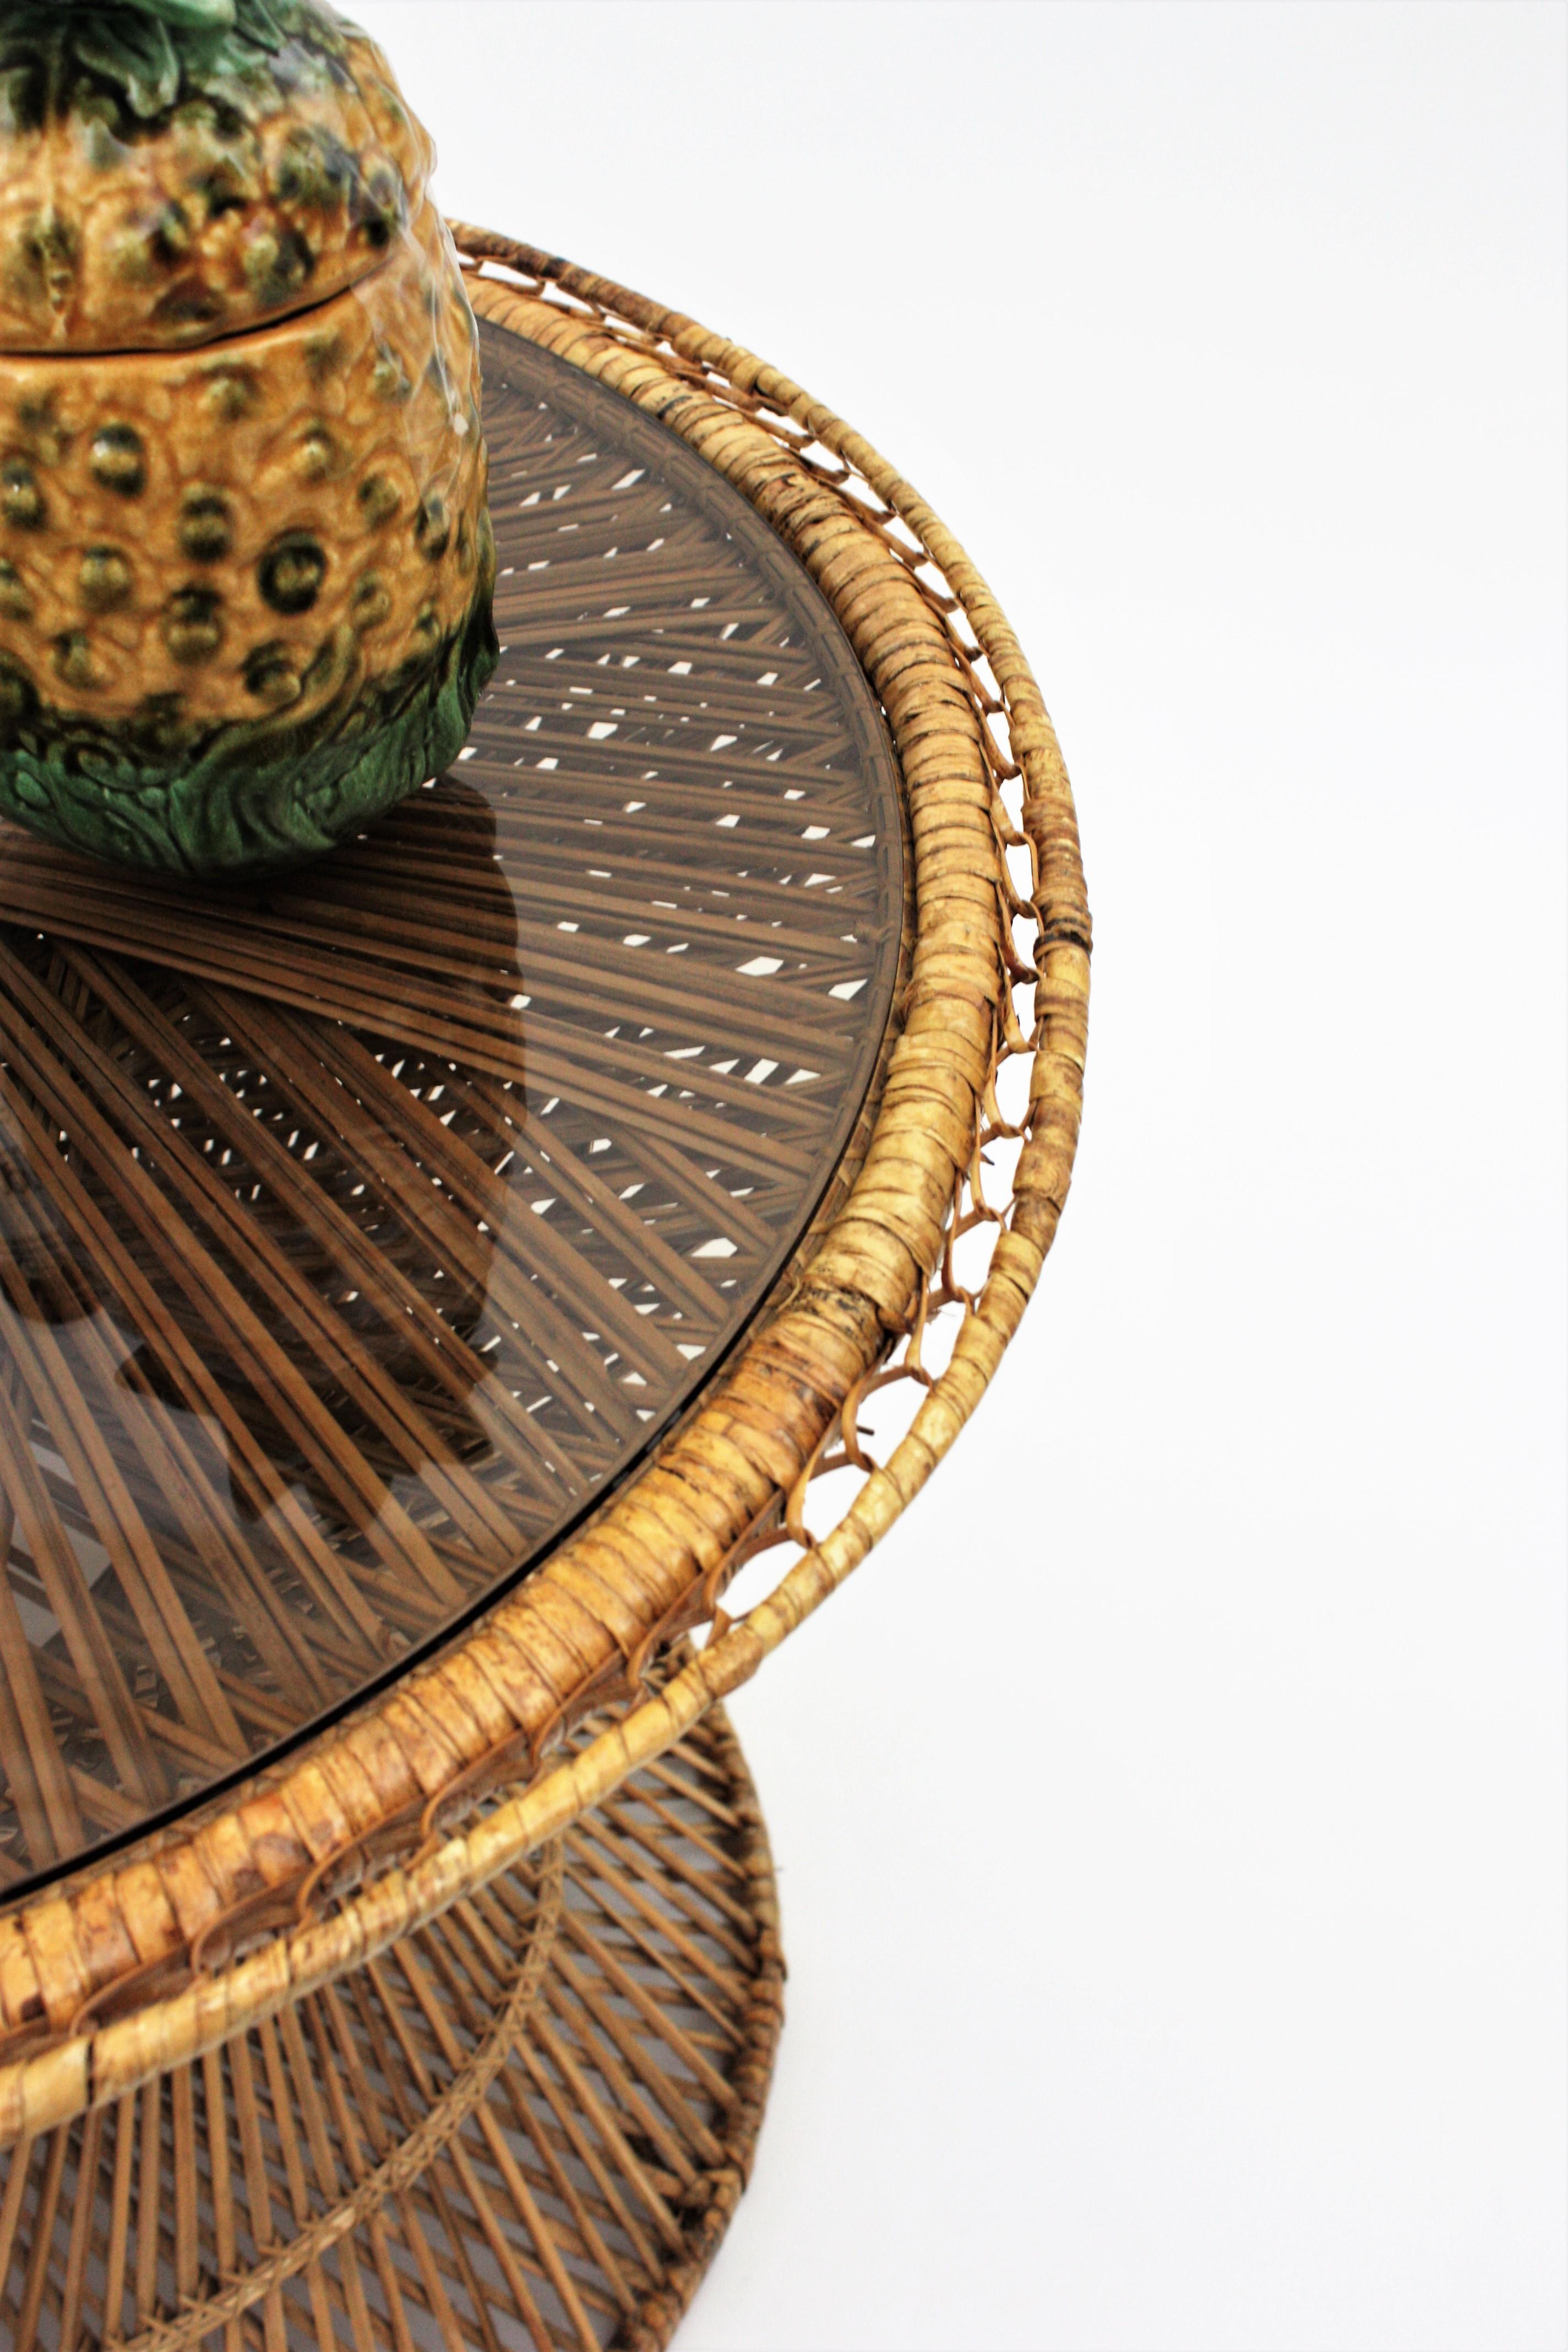 Woven Wicker and Rattan Emmanuelle Peacock Coffee Table, Spain, 1960s For Sale 1